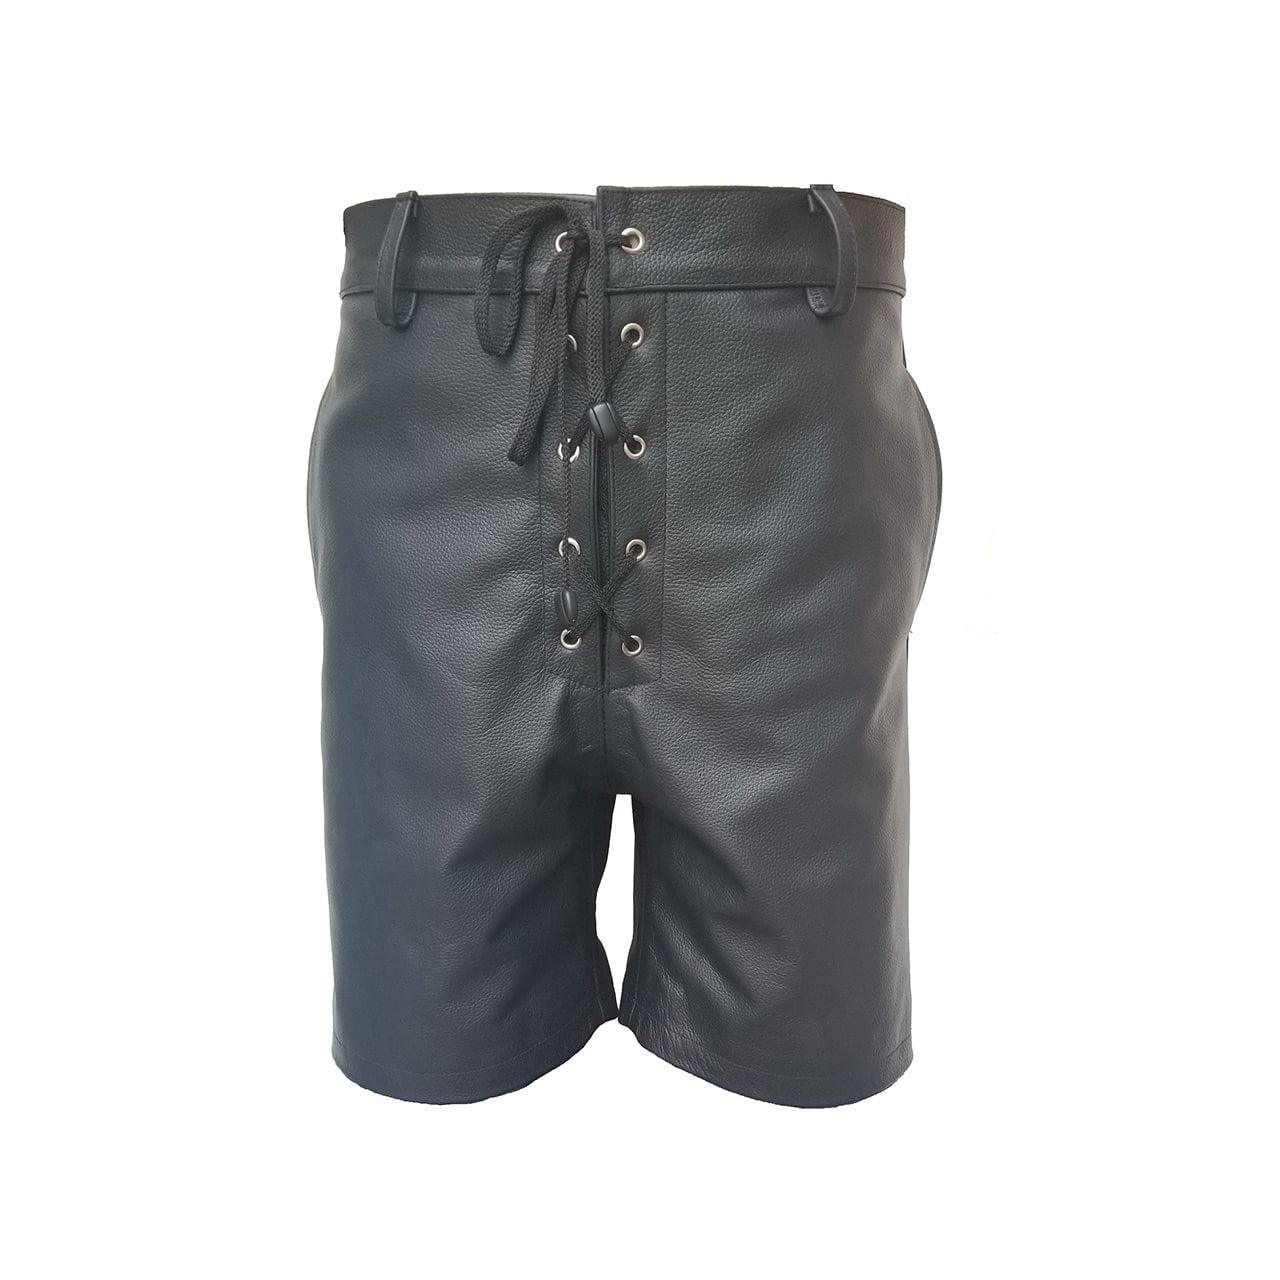 Mens Black Leather Shorts with Lacing Front Closure - (SHORTS2)